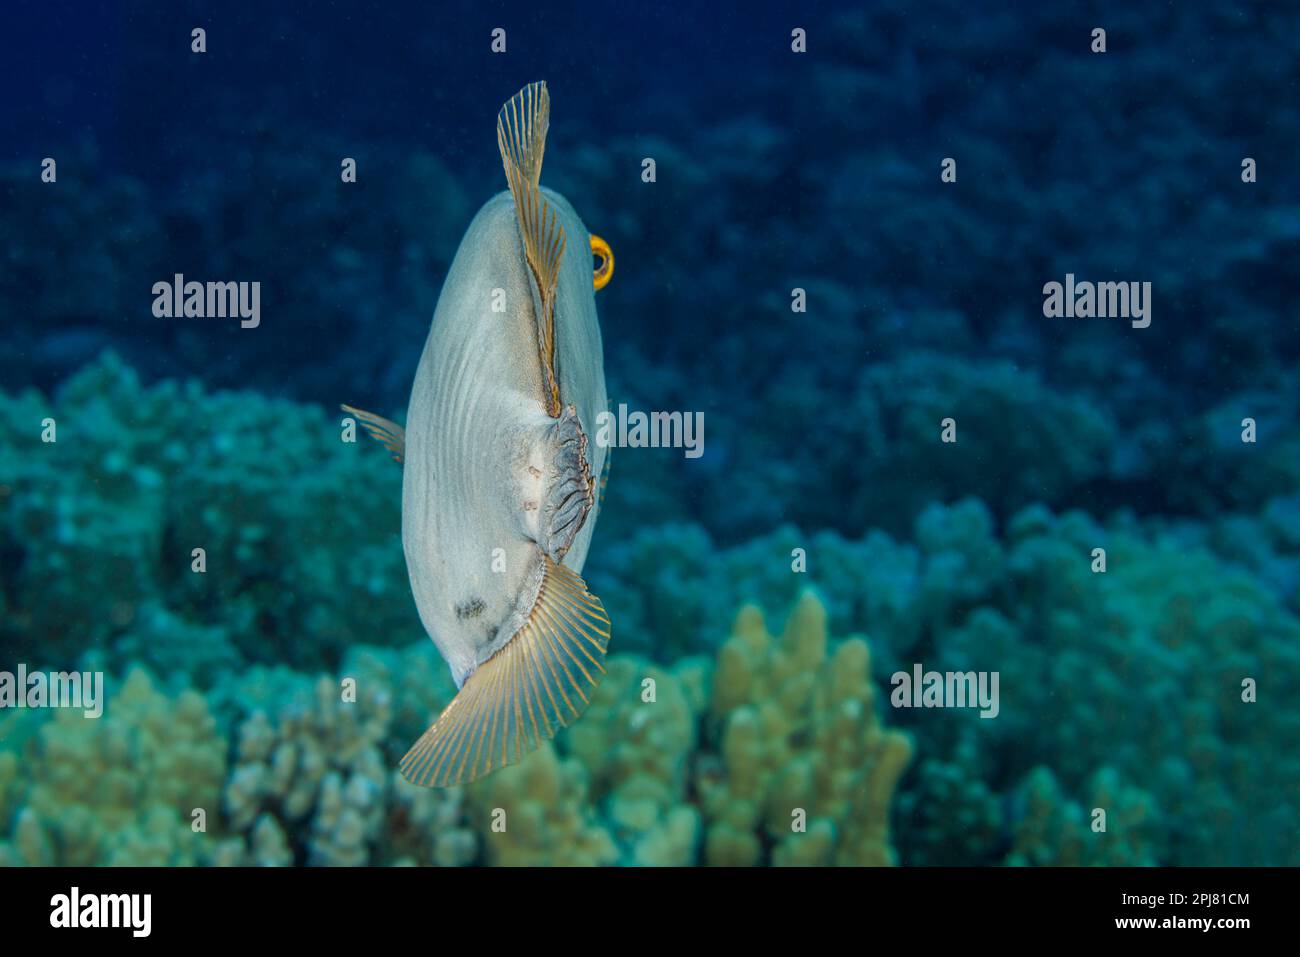 The barred filefish, Cantherhines dumerilii, reaches 15 inches in length and feed mainly on branching corals. This individual is using its independent Stock Photo